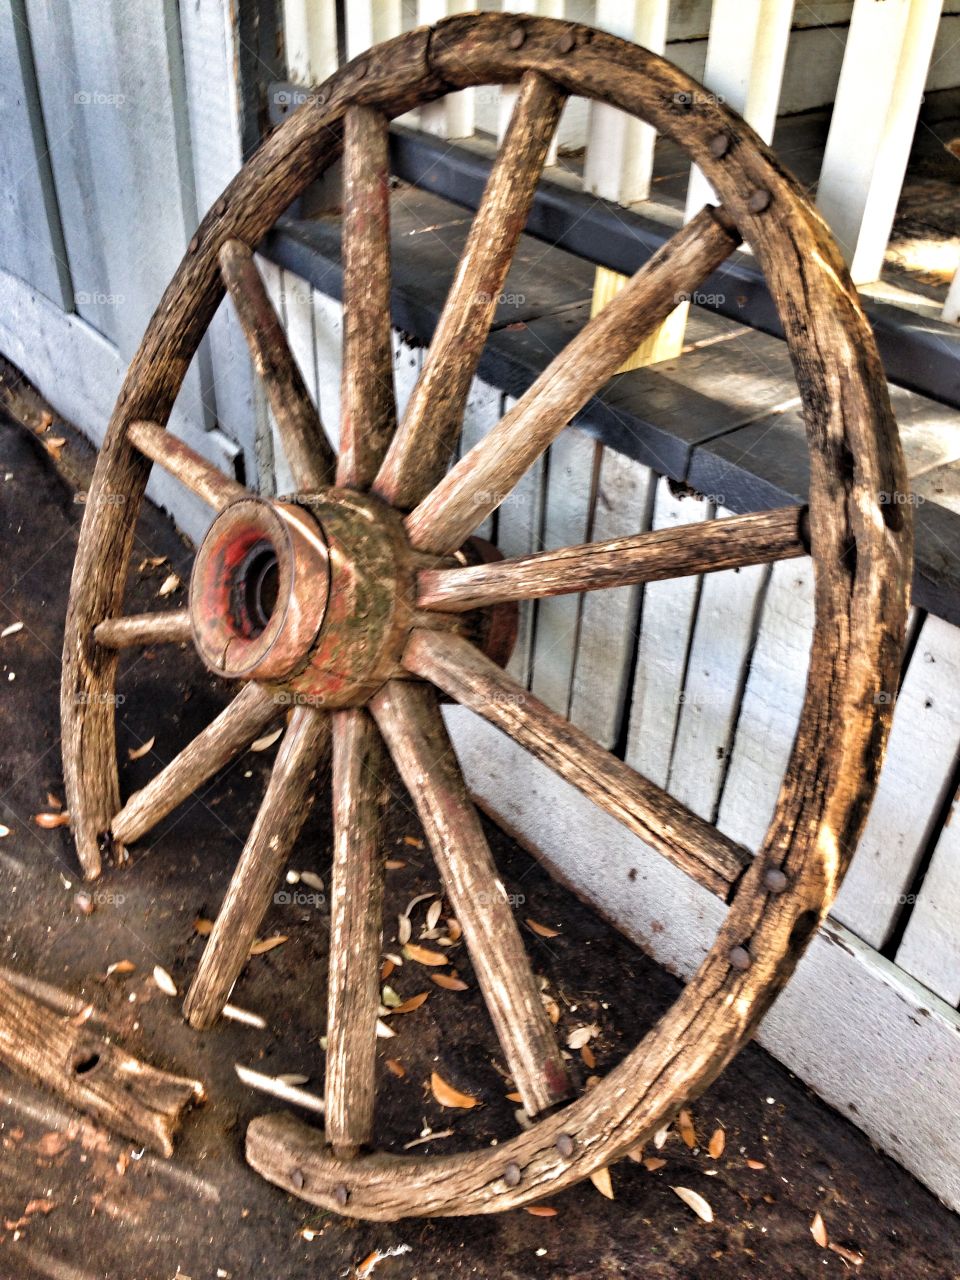 The old days. Old wagon wheel